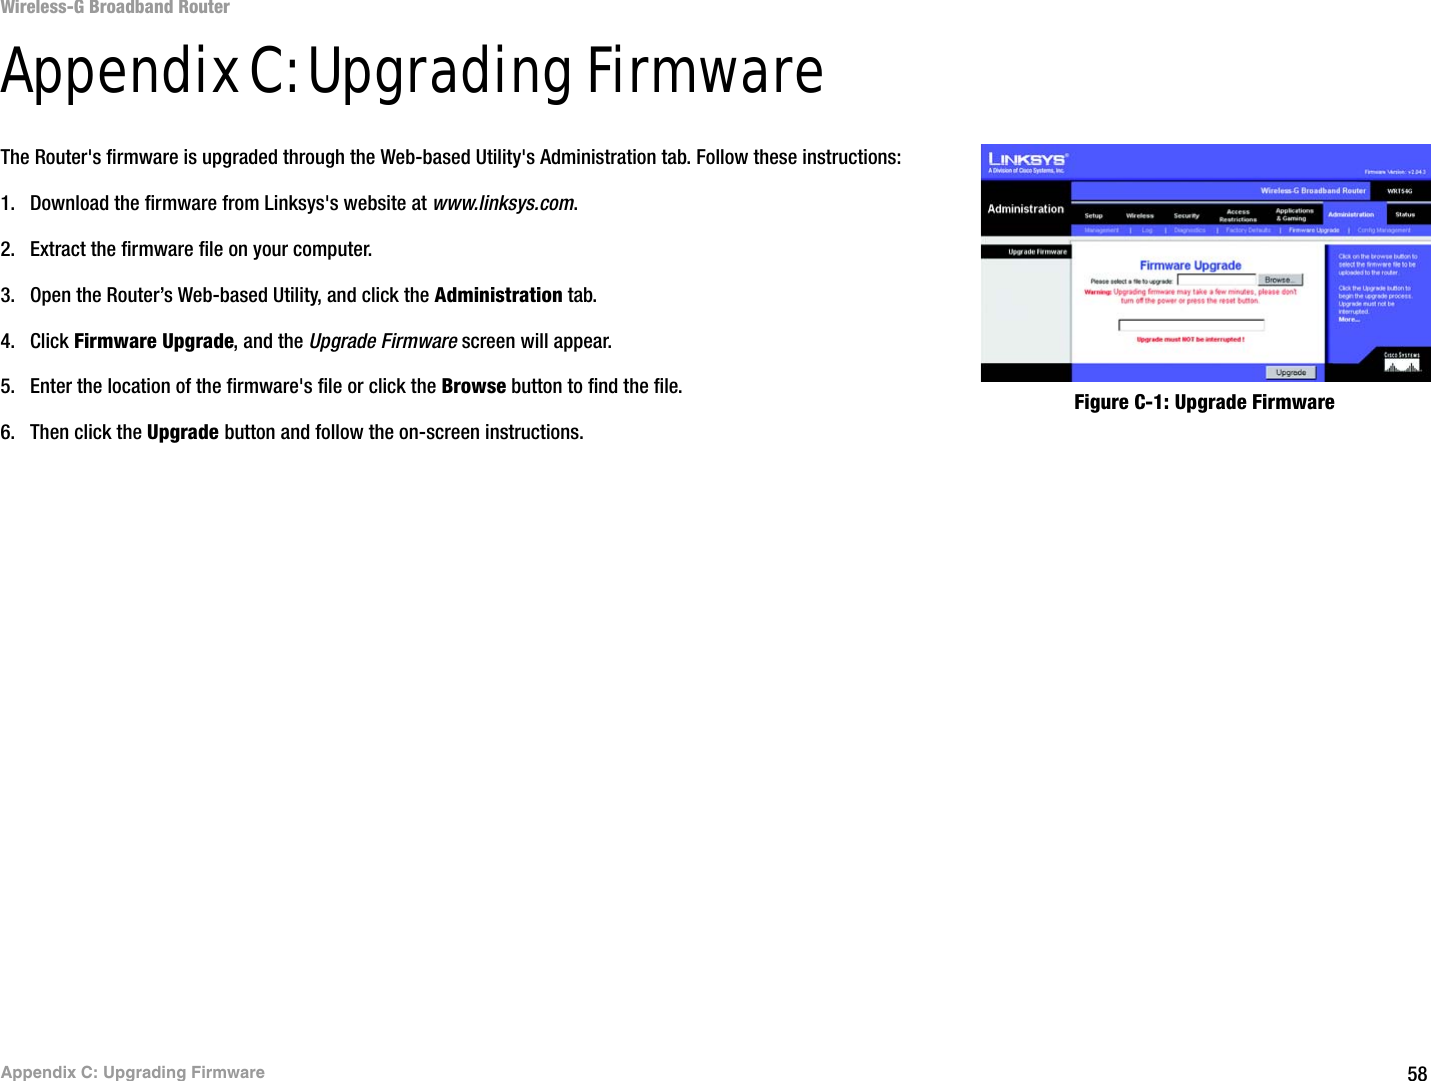 58Appendix C: Upgrading FirmwareWireless-G Broadband RouterAppendix C: Upgrading FirmwareThe Router&apos;s firmware is upgraded through the Web-based Utility&apos;s Administration tab. Follow these instructions:1. Download the firmware from Linksys&apos;s website at www.linksys.com.2. Extract the firmware file on your computer.3. Open the Router’s Web-based Utility, and click the Administration tab.4. Click Firmware Upgrade, and the Upgrade Firmware screen will appear.5. Enter the location of the firmware&apos;s file or click the Browse button to find the file.6. Then click the Upgrade button and follow the on-screen instructions.Figure C-1: Upgrade Firmware